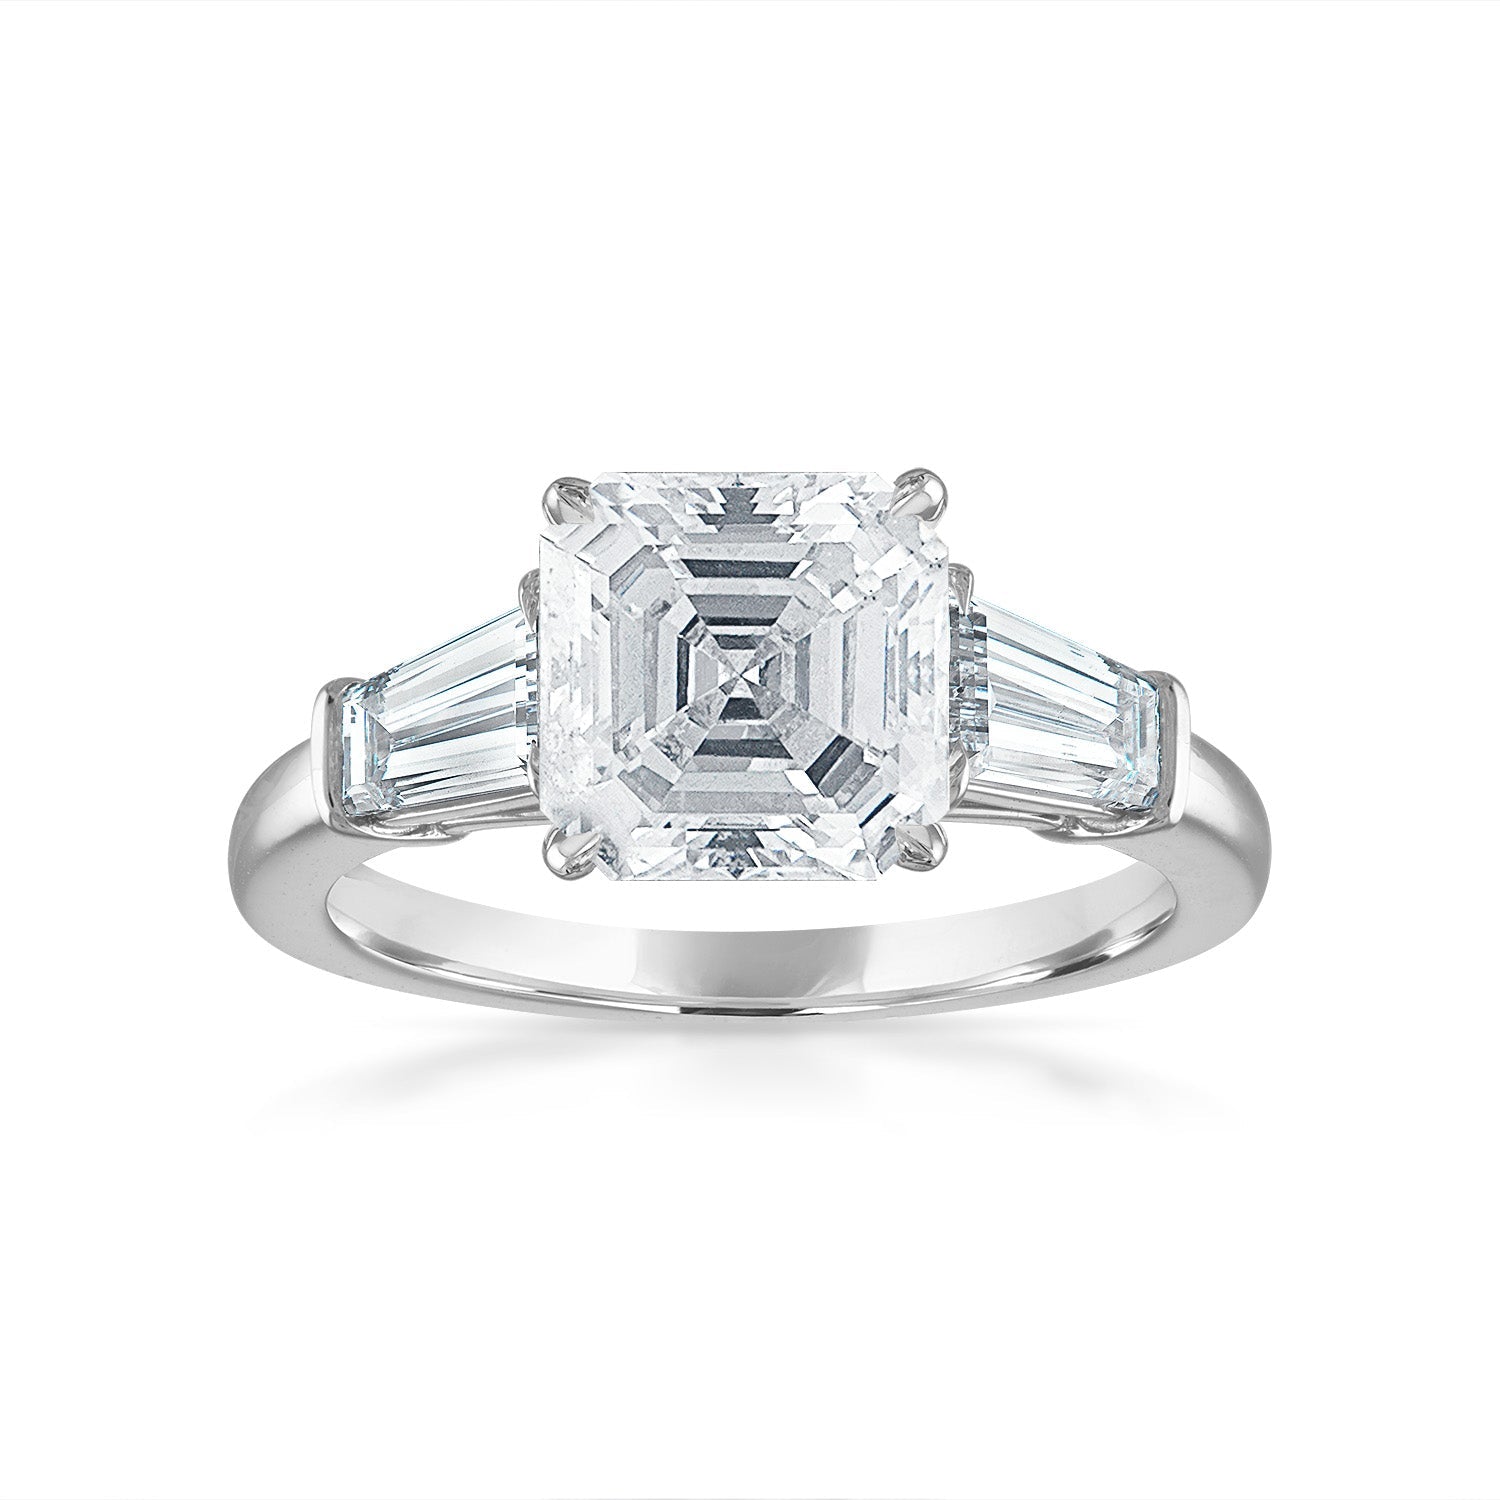 Asscher Engagement Ring with Baguette Side Stones in Platinum